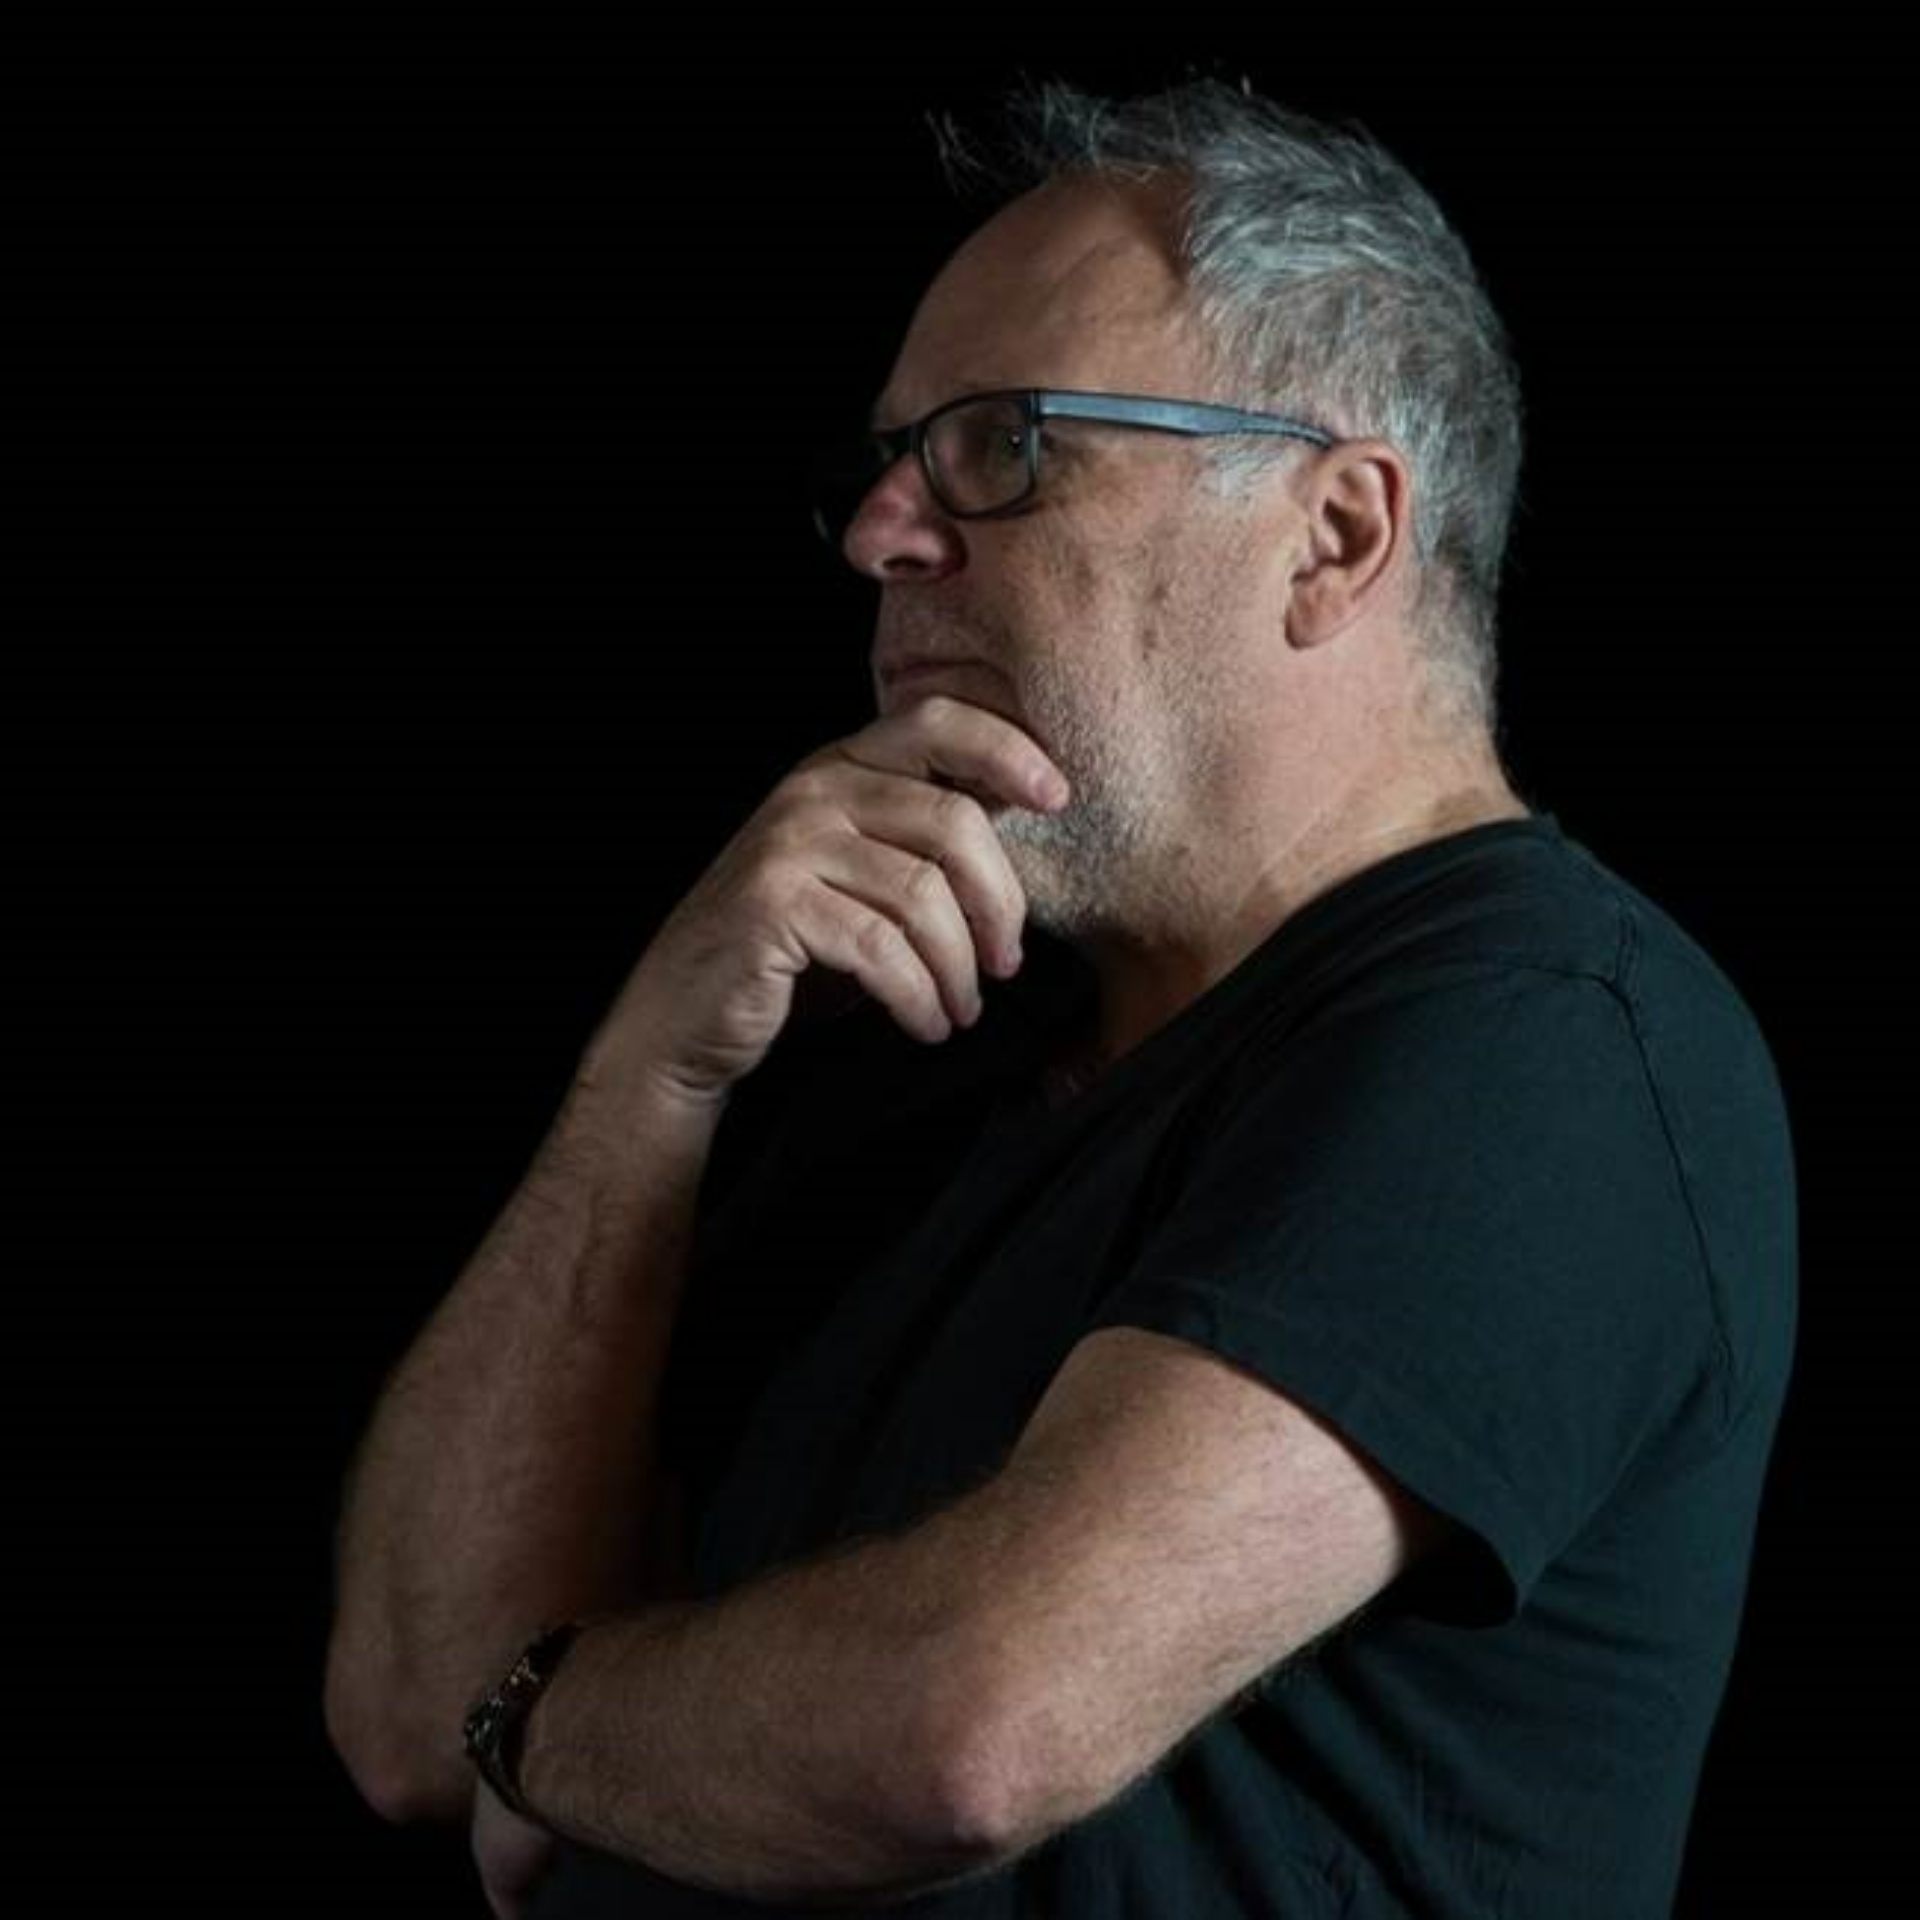 A side image of Terry Smith. He has short grey hair and wears a black t-shirt. He faces to the left, holding his right hand up to his chin in thought, his left arm across his body.